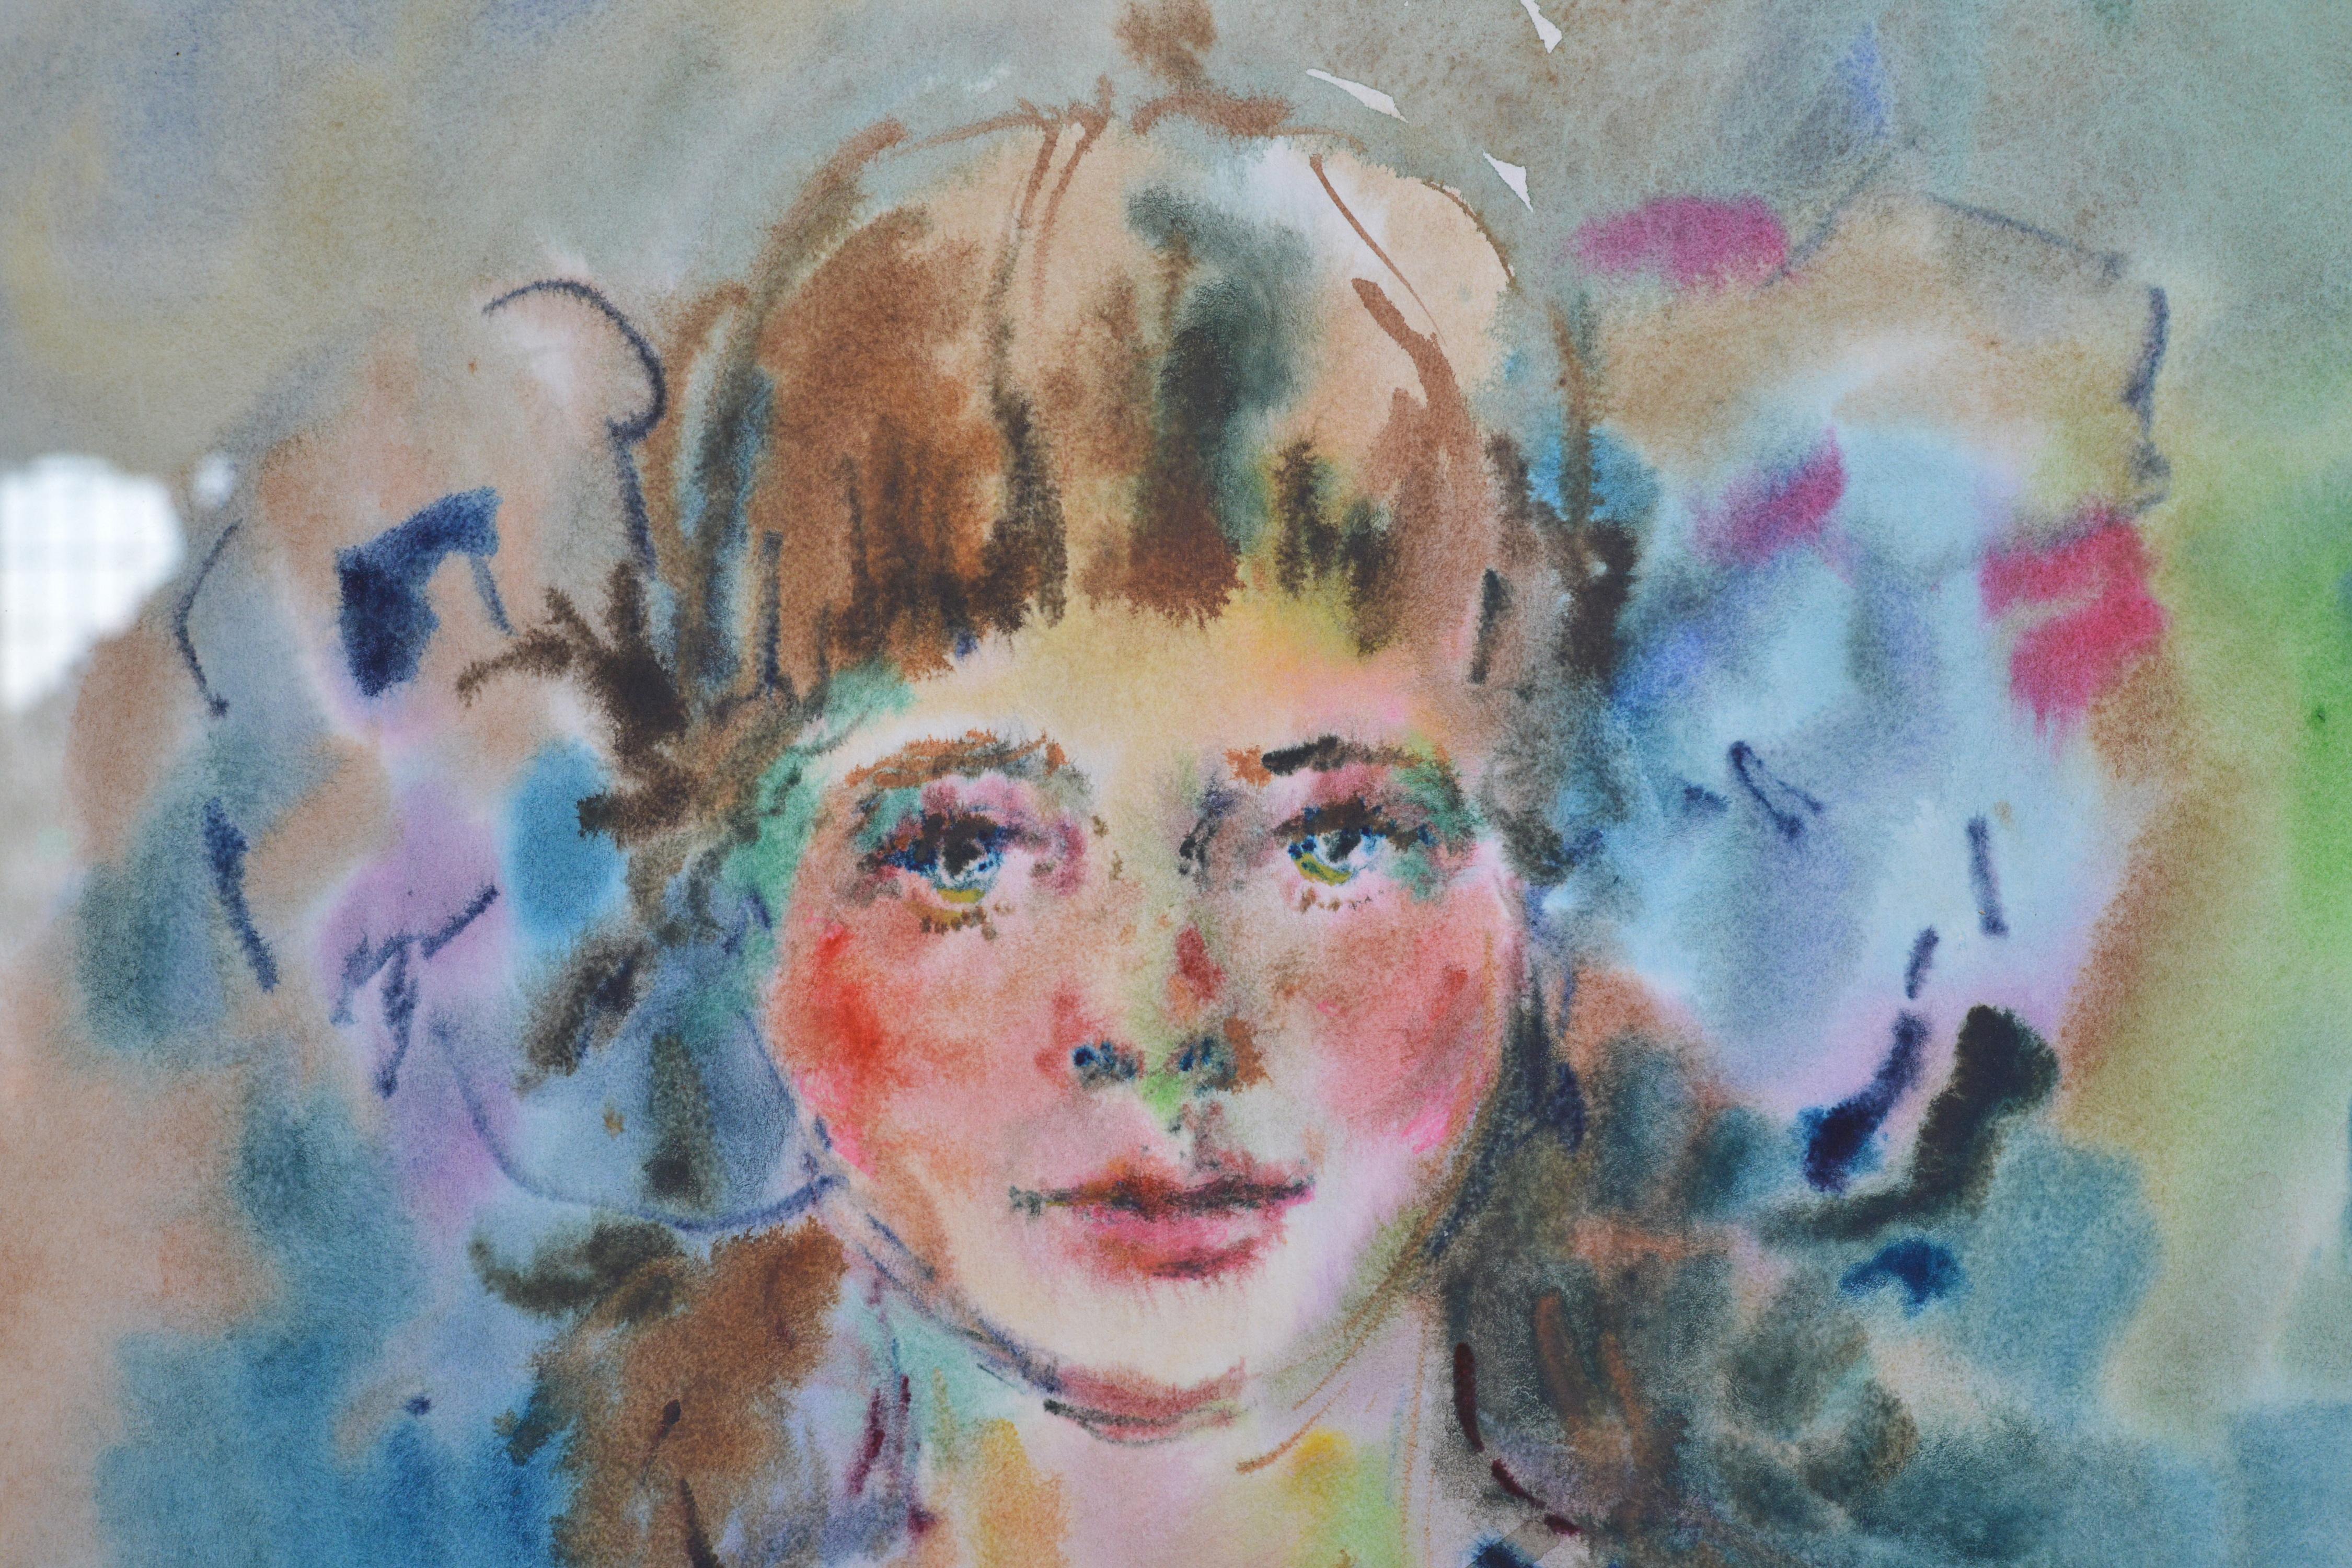 Russian Portrait Flushed girl w Big bows 20th century Watercolor by Fonvizin - Abstract Impressionist Painting by Artur Vladimirovich Fonvizin